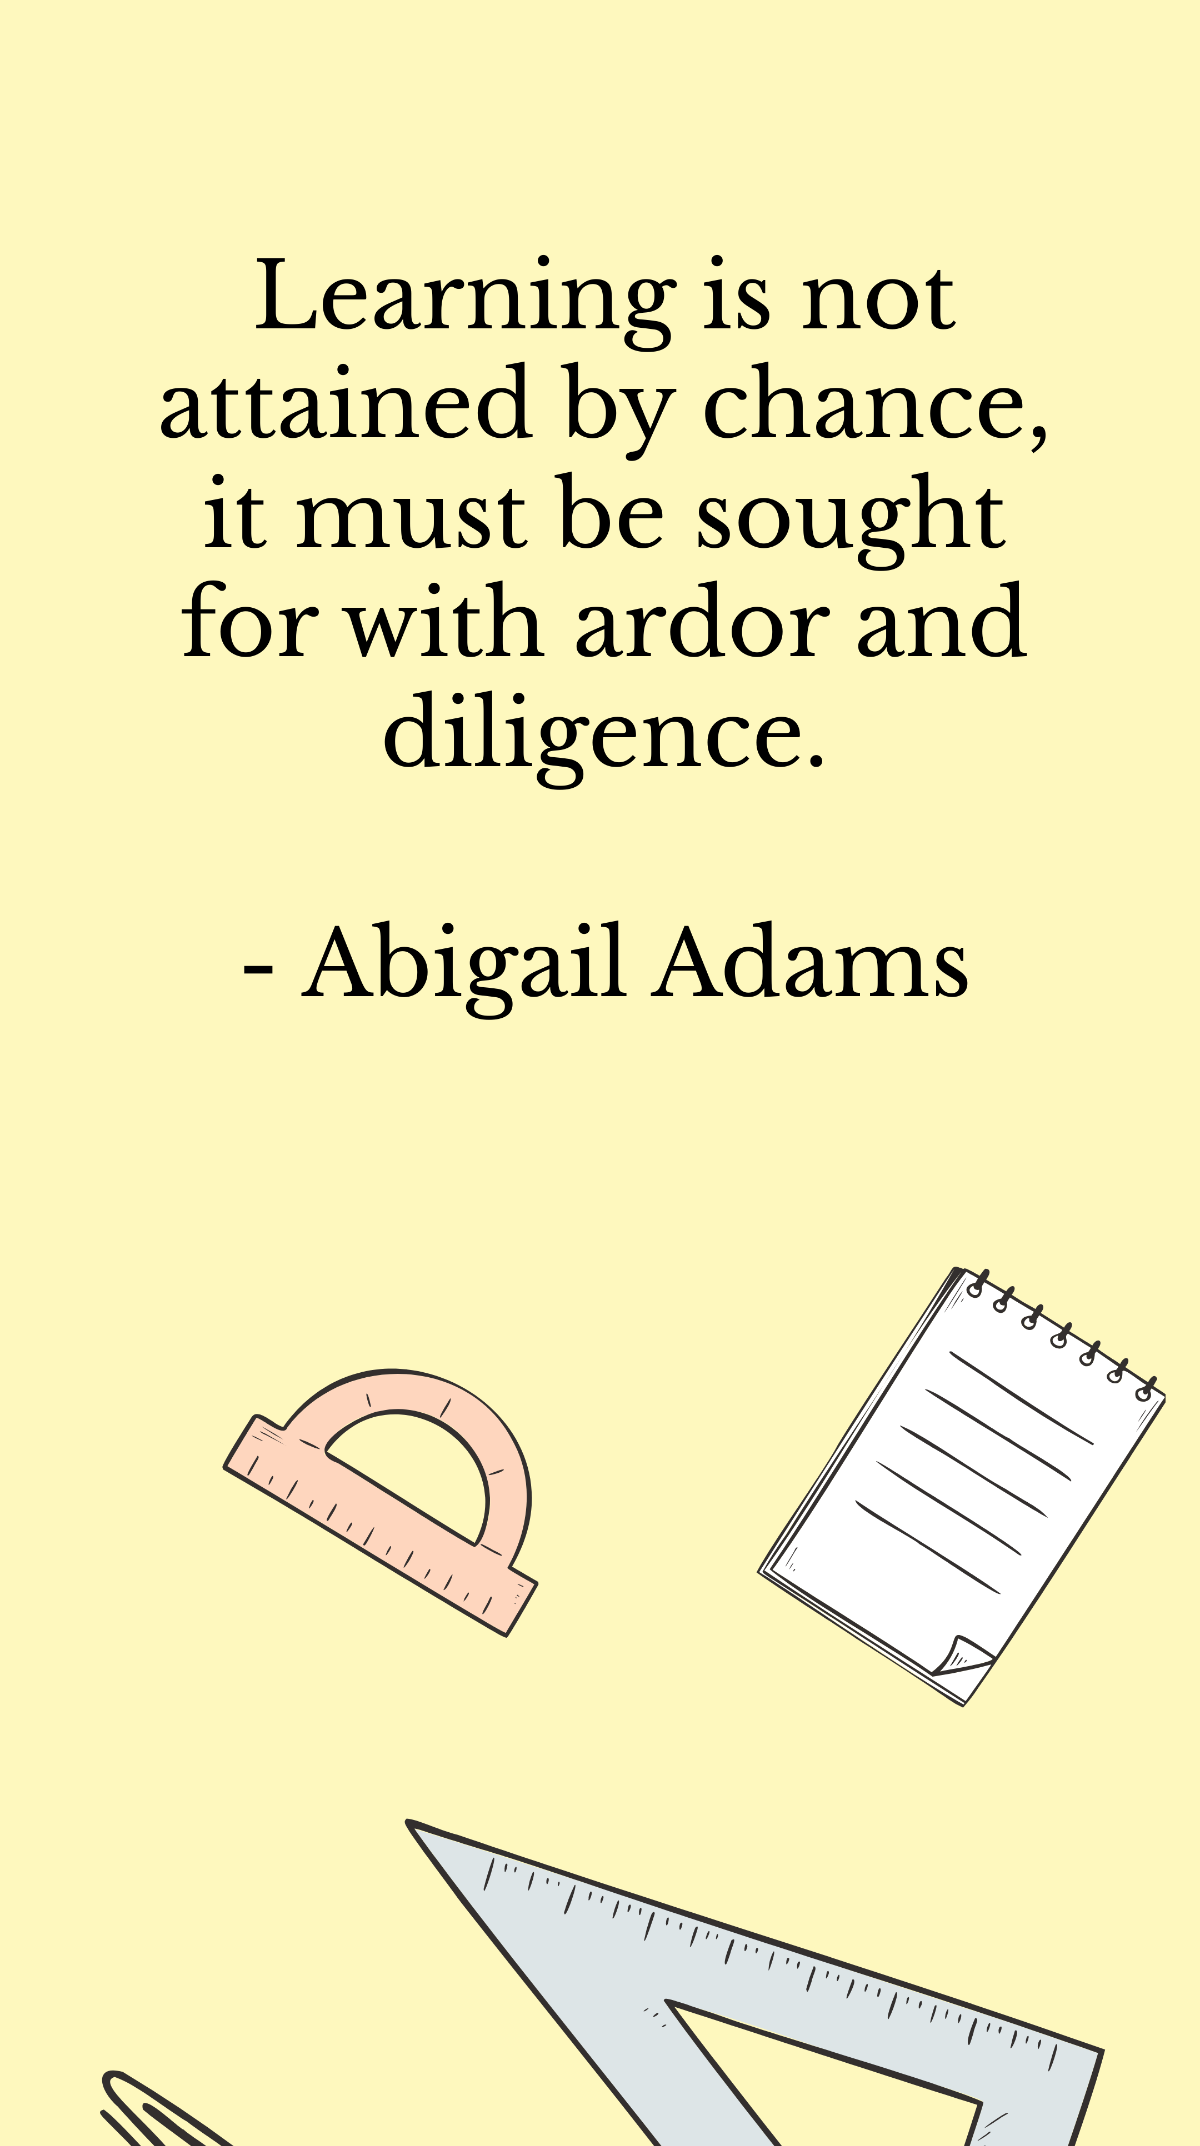 Abigail Adams - Learning is not attained by chance, it must be sought for with ardor and diligence. Template